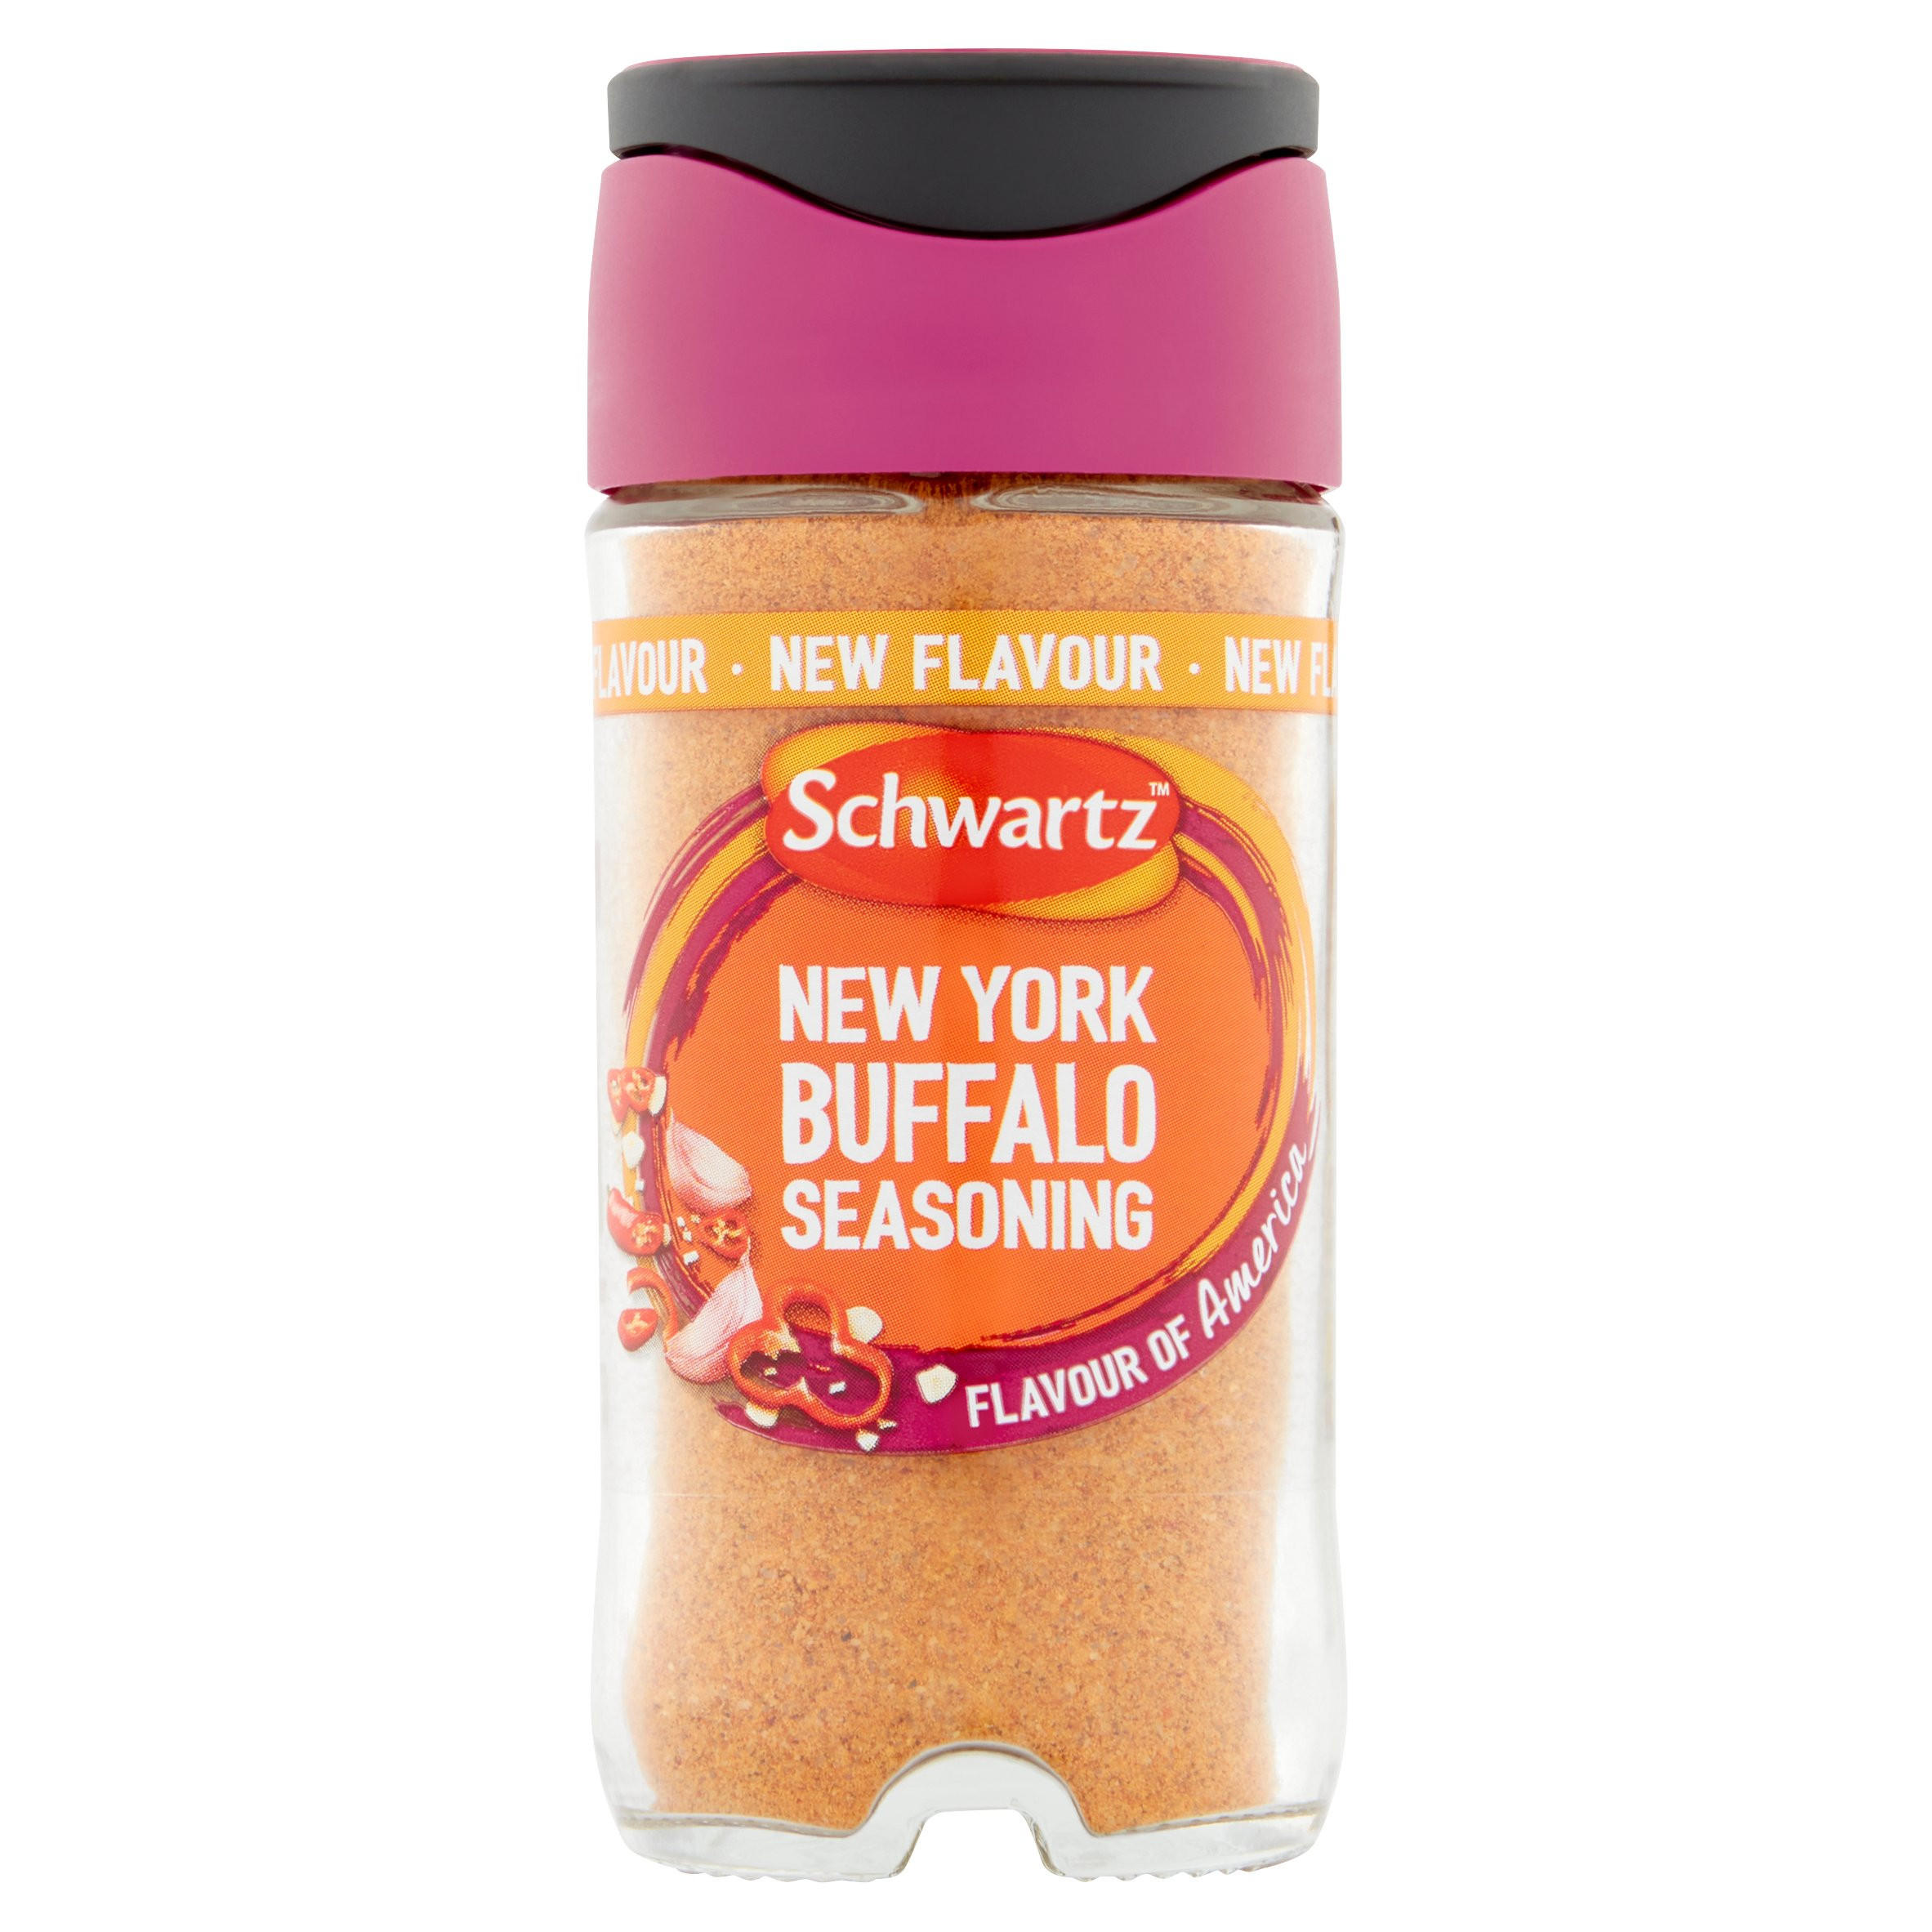 American Spices & Seasonings products in the UK at American Fizz!